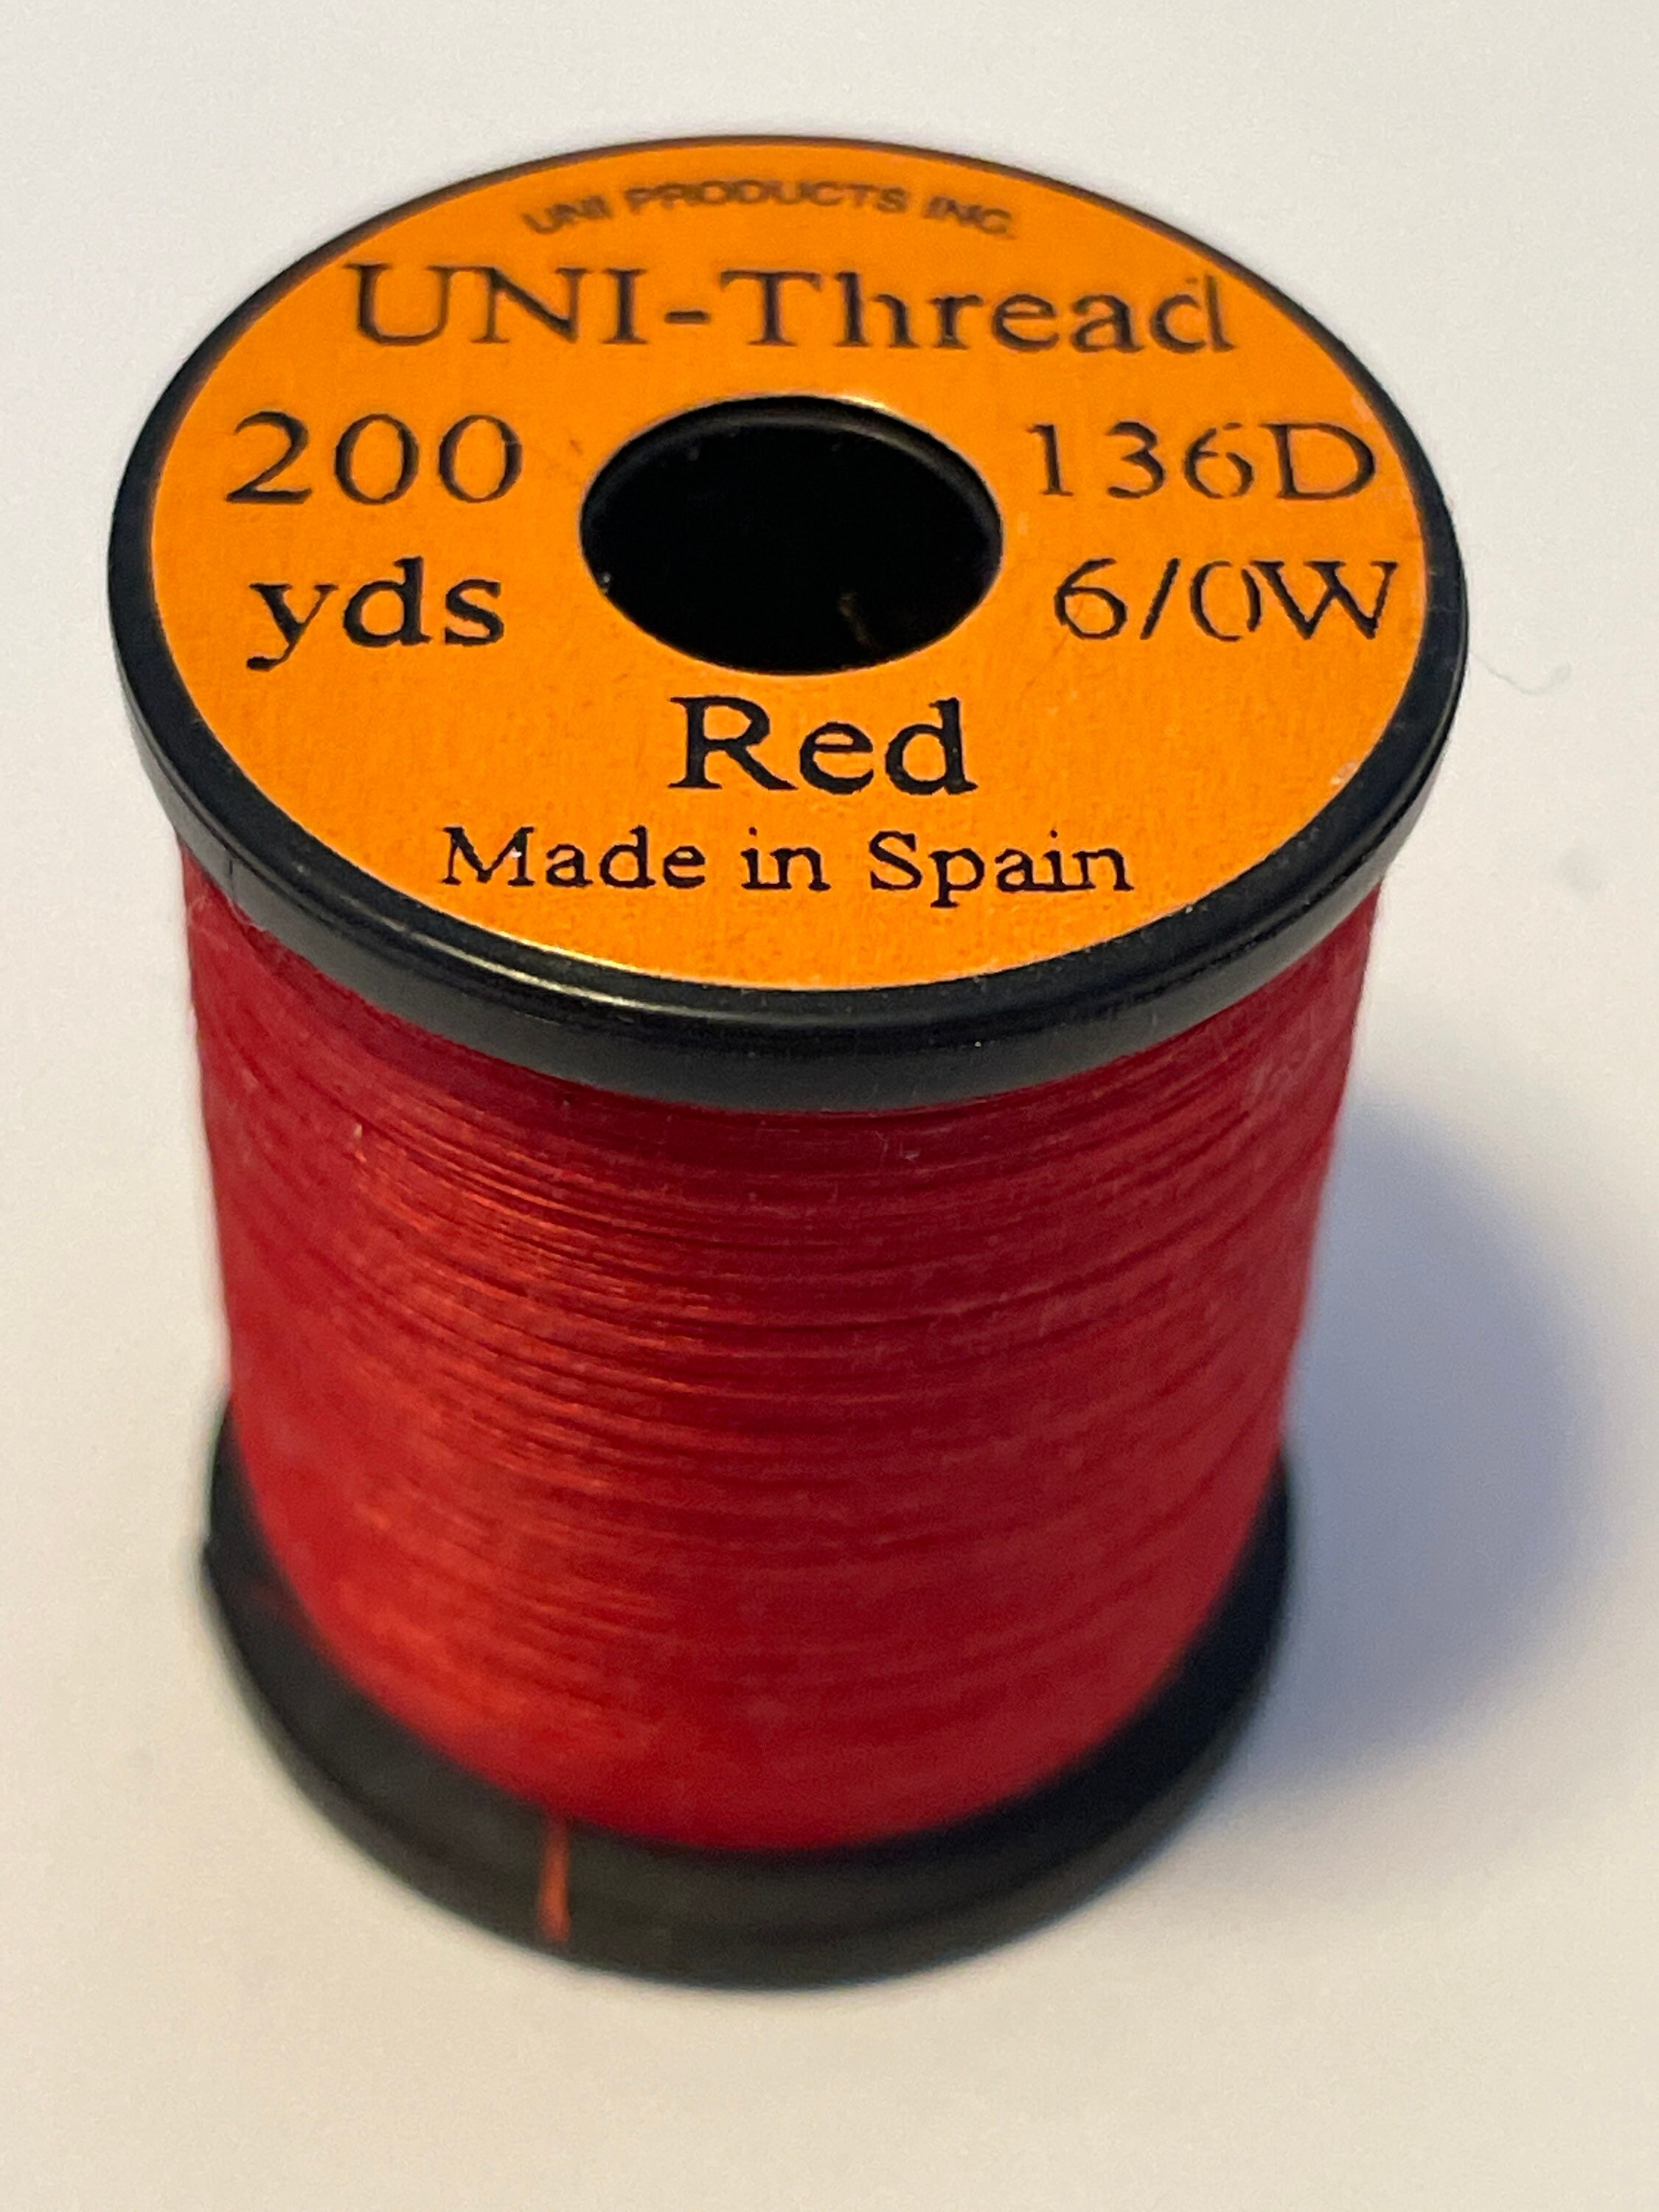 Hand Dyed Embroidery Thread, 5 Thin Threads, Lucky Dip, Embroidery Floss, Cross  Stitch Thread, Variegated Colours 